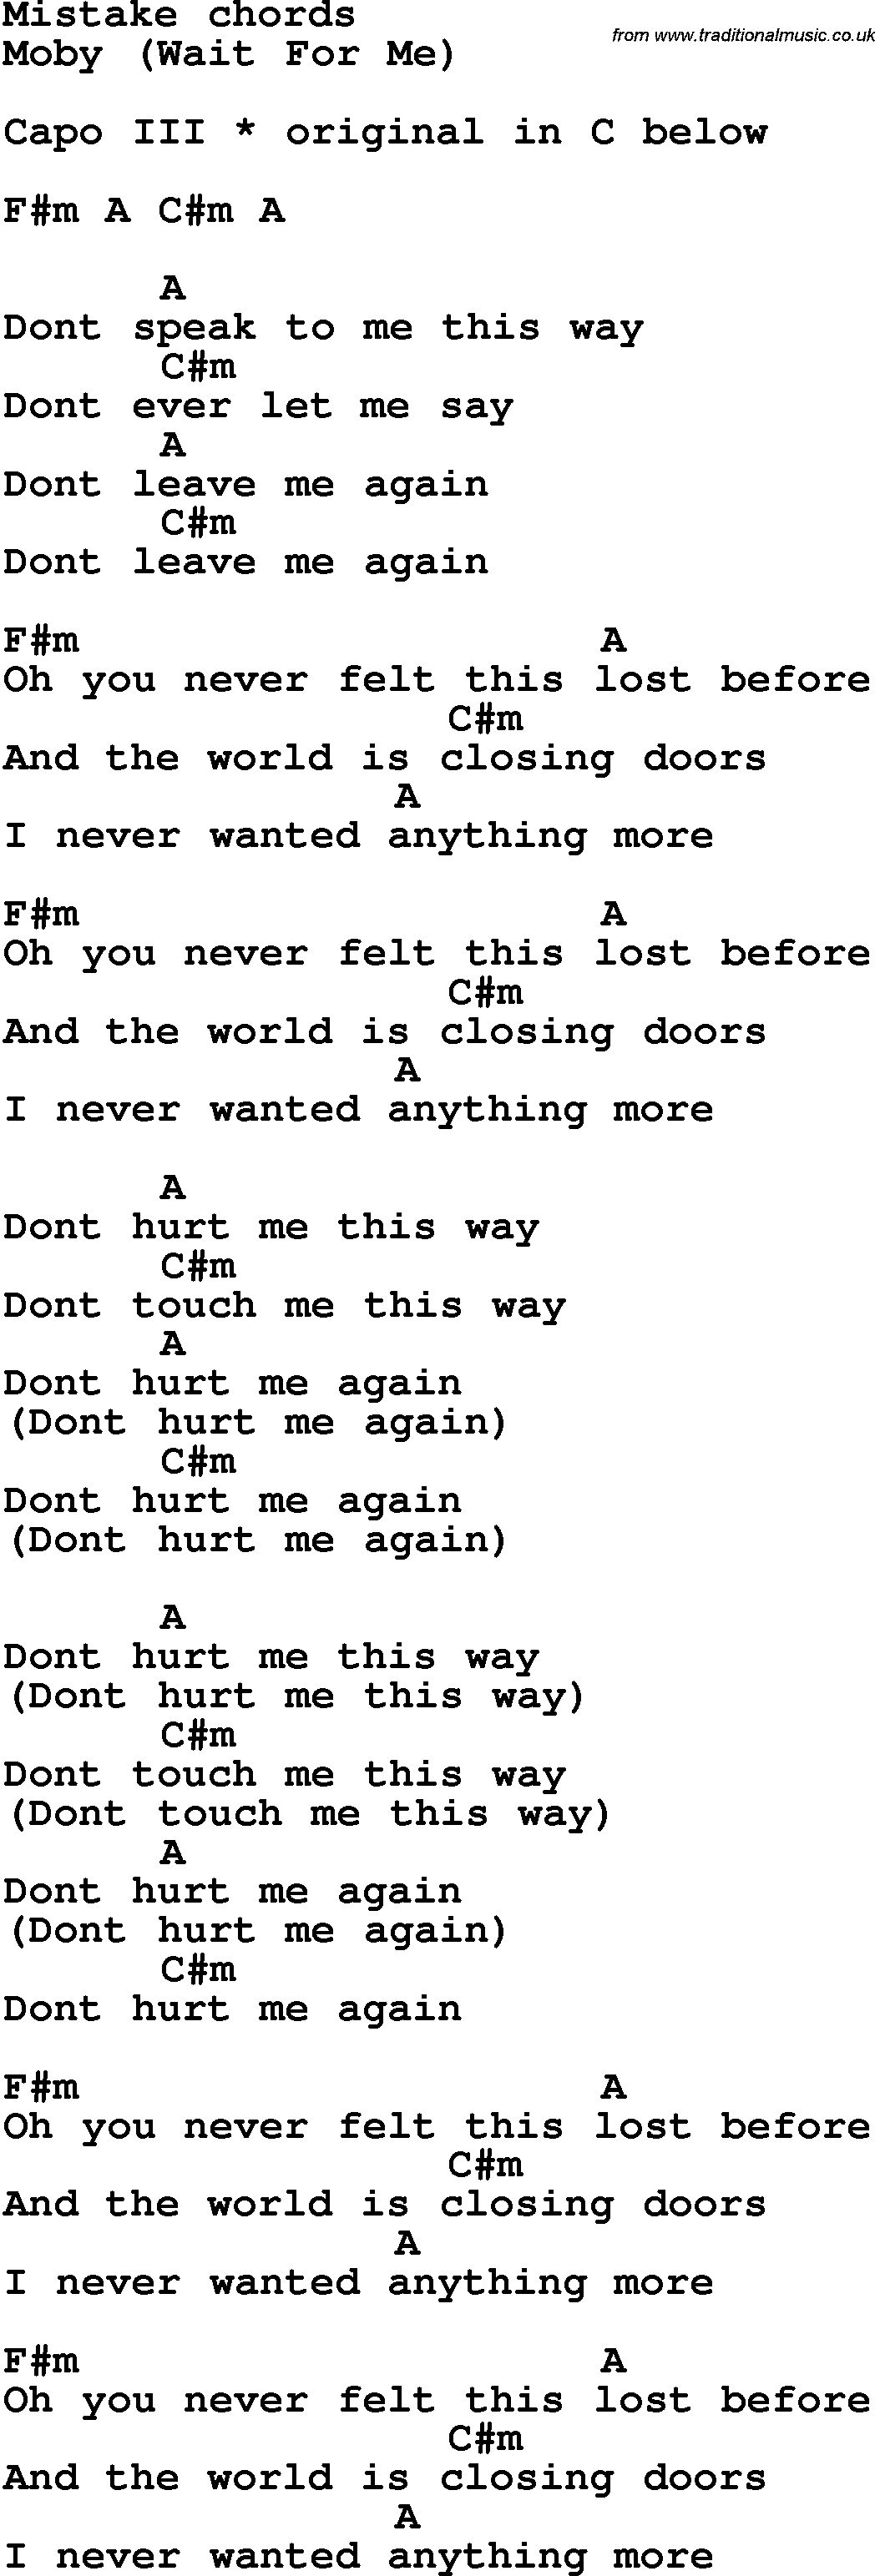 Song Lyrics with guitar chords for Mistake